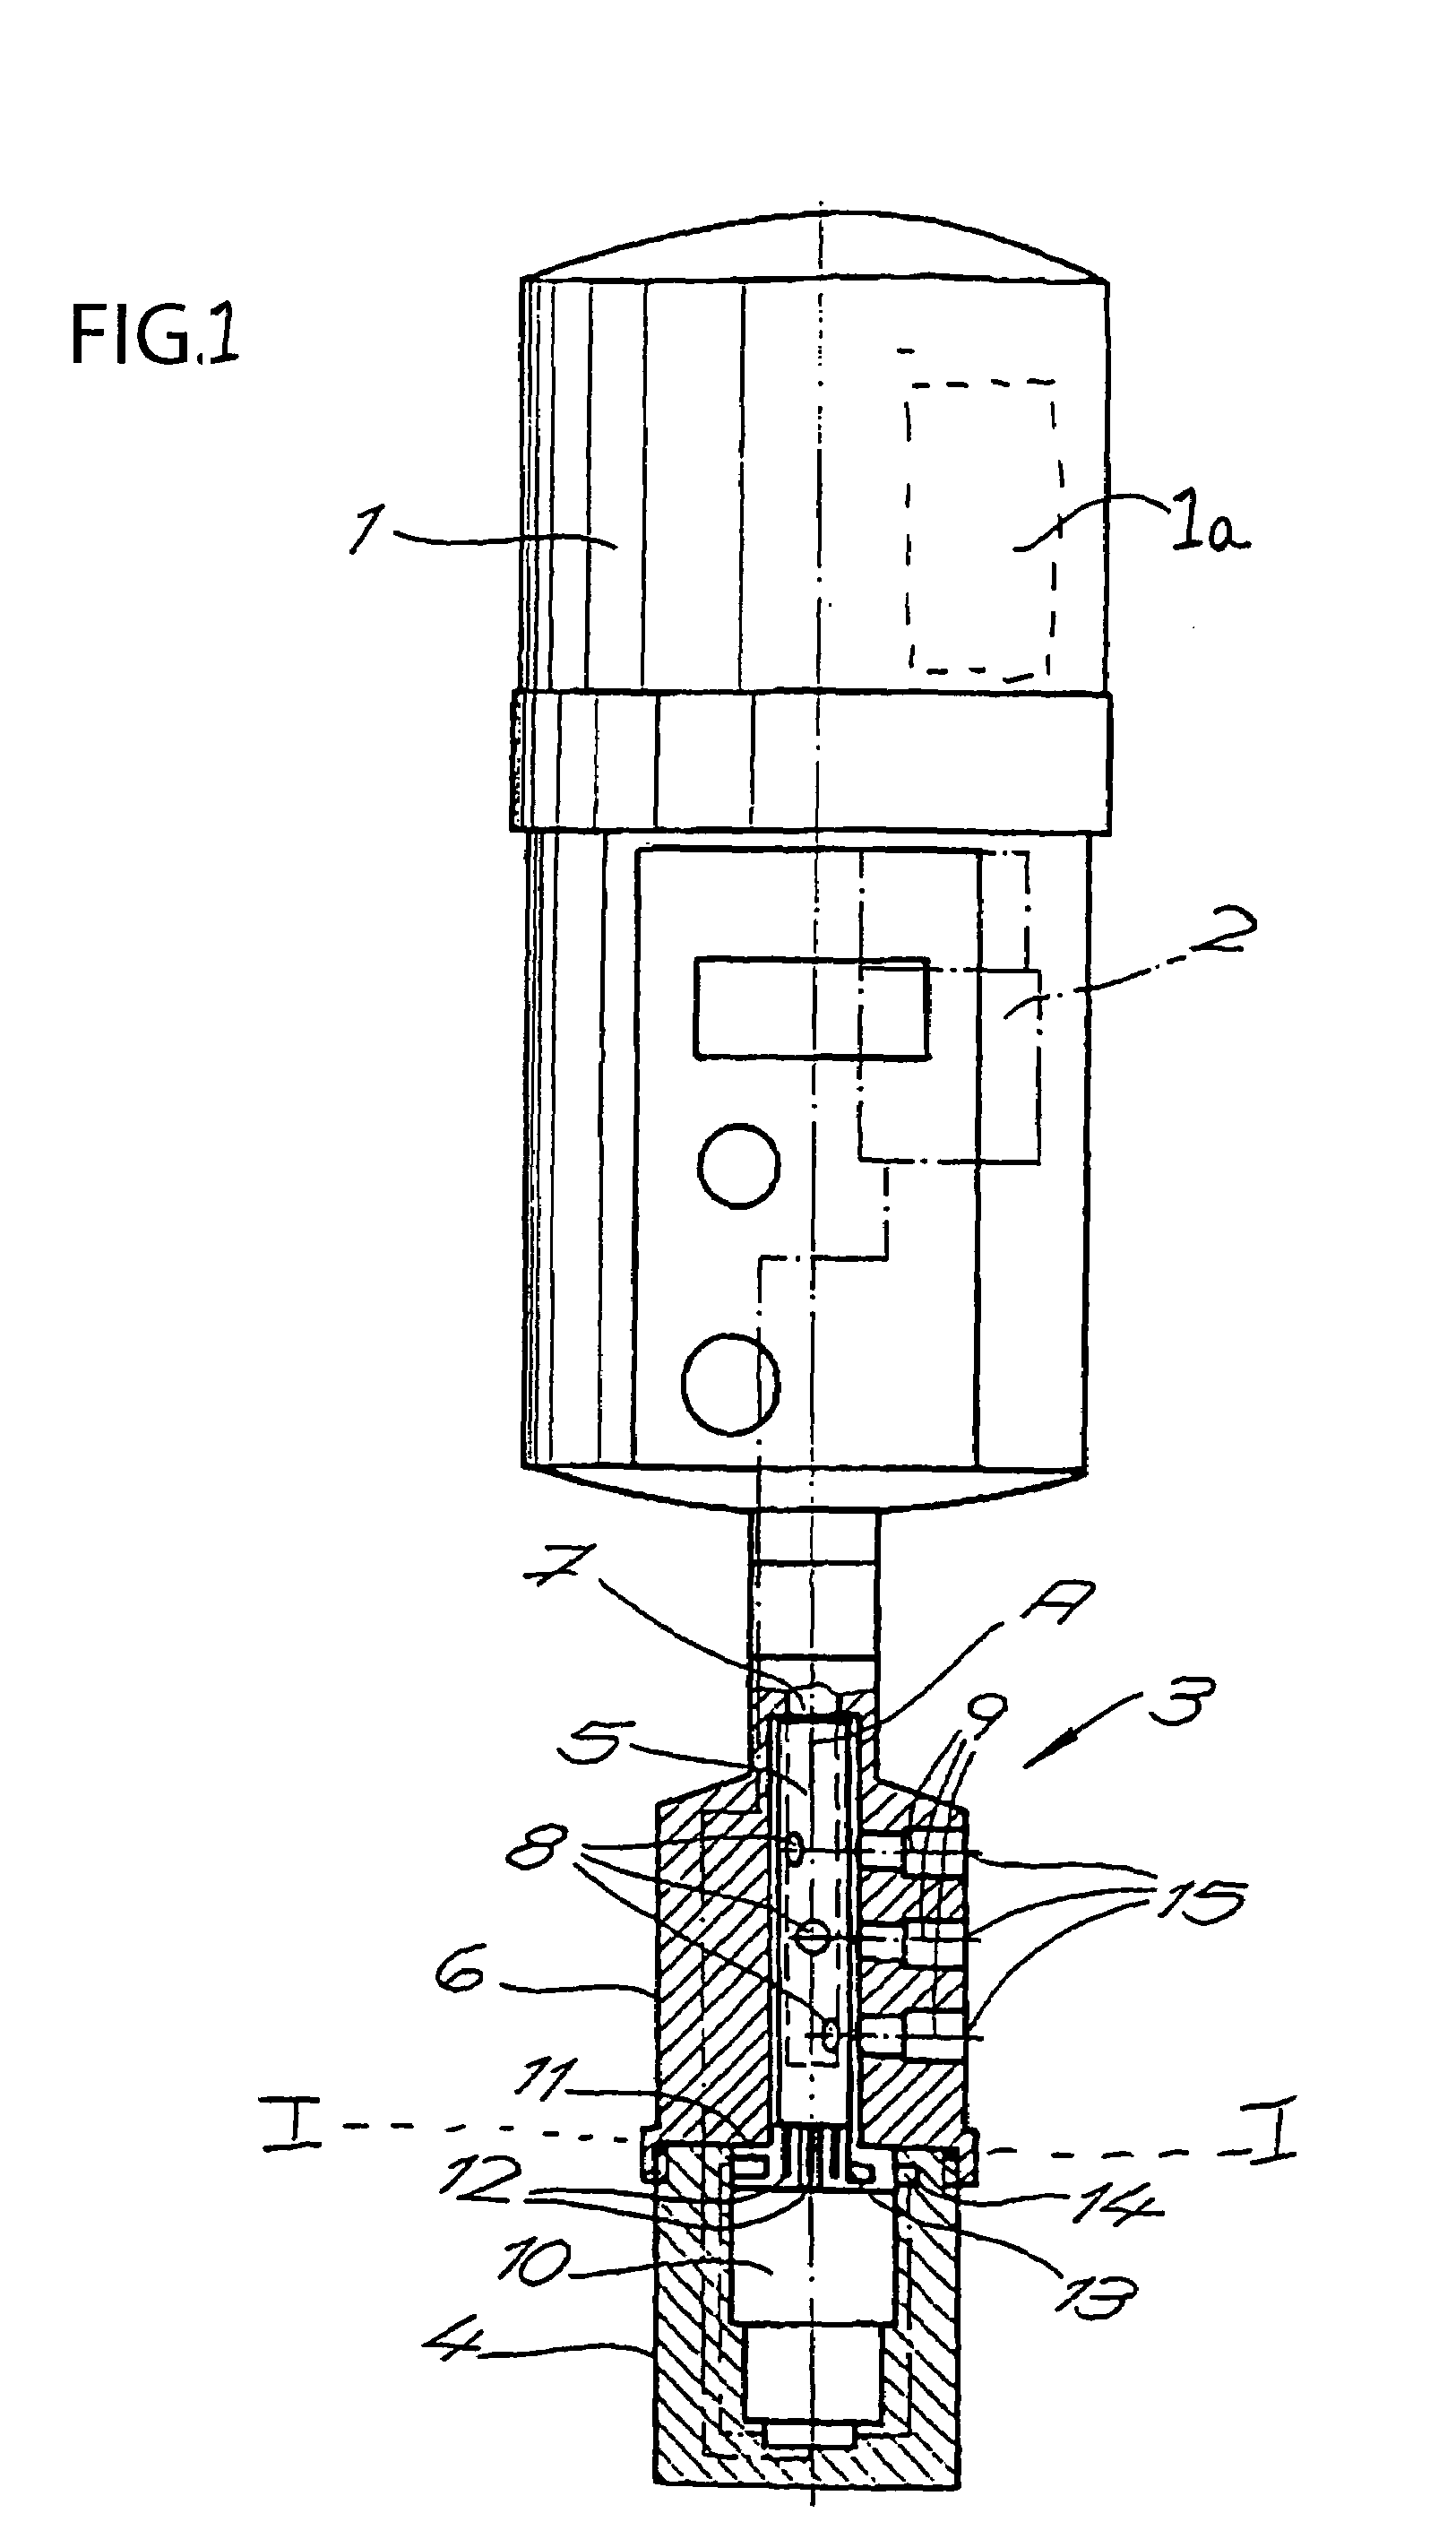 Device for supplying lubricant to several lubrication points on machine parts